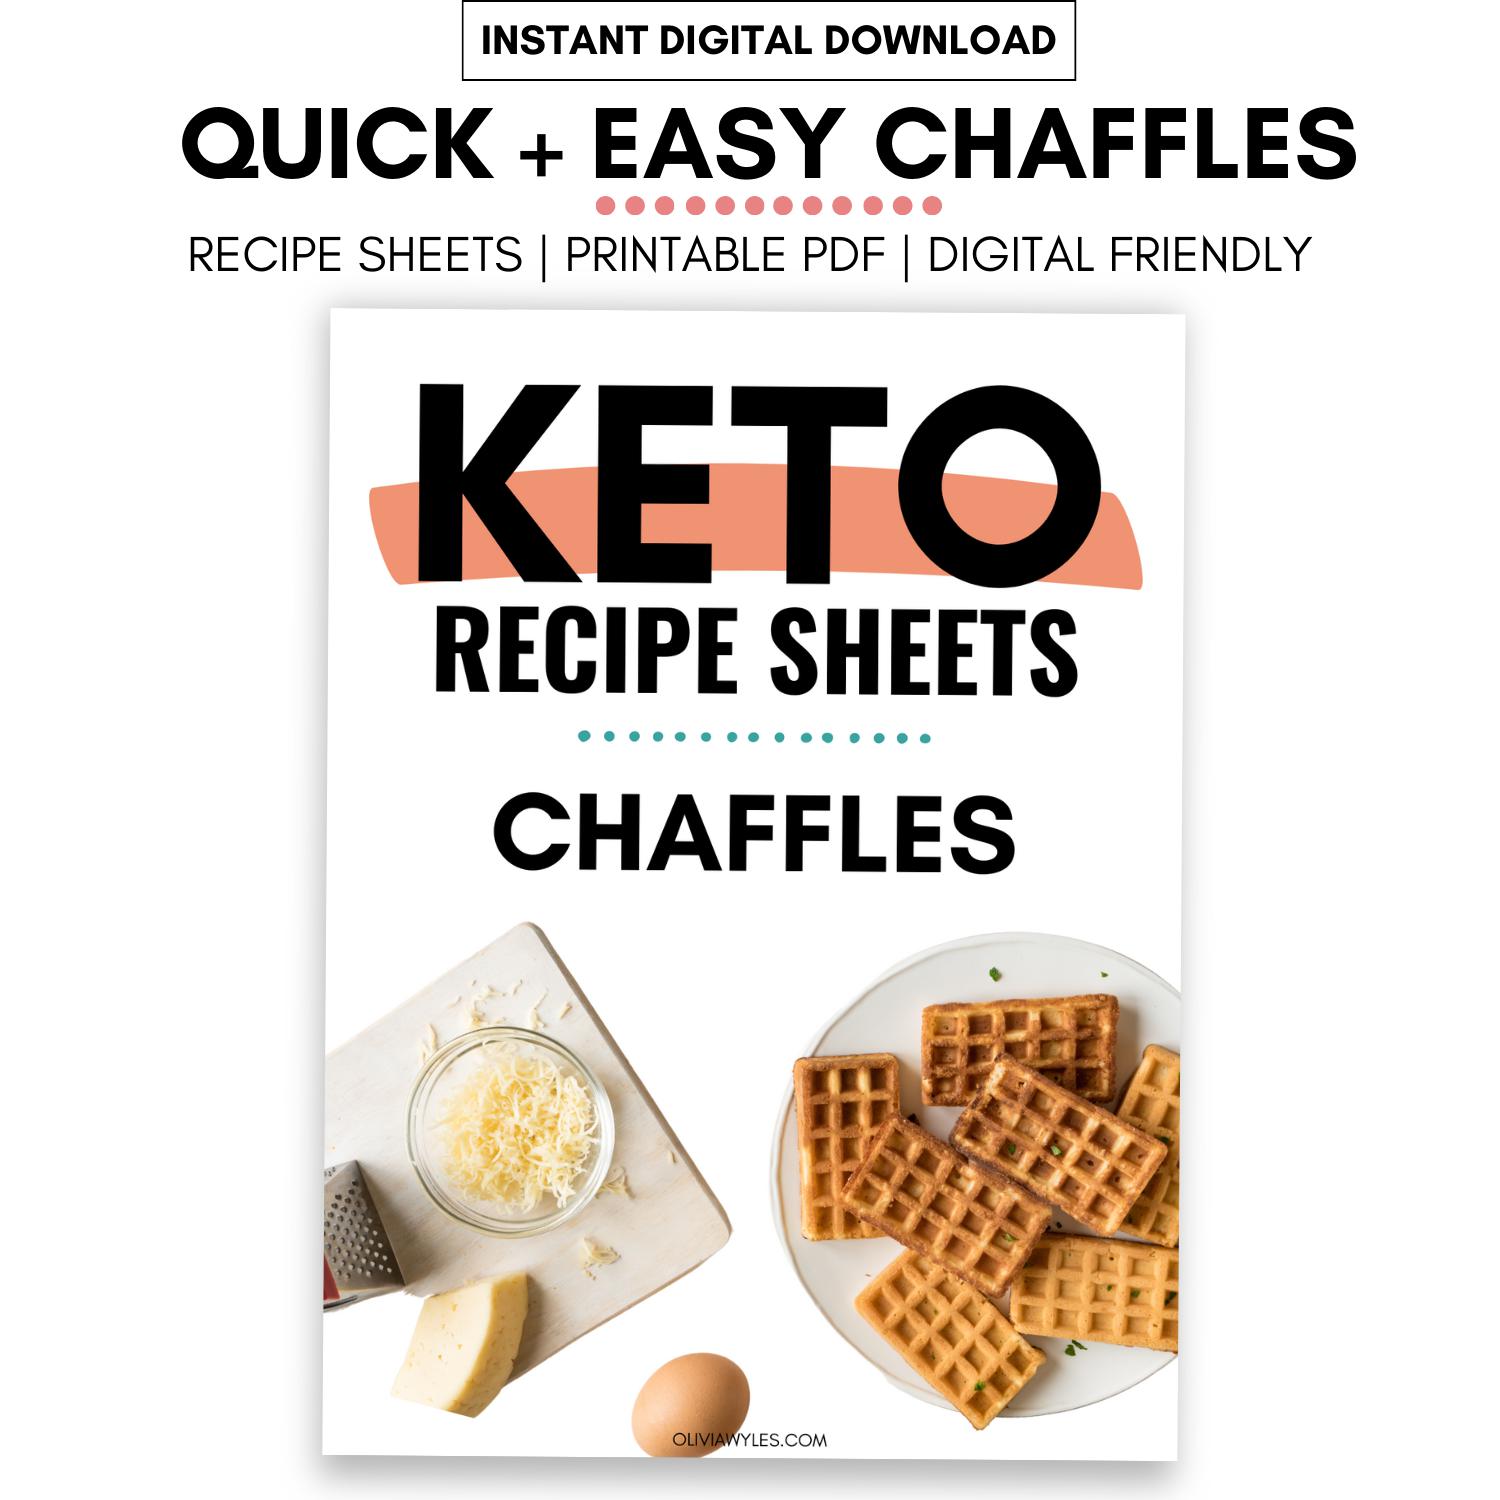 Chaffle recipe - easy chaffle recipe in just minutes!